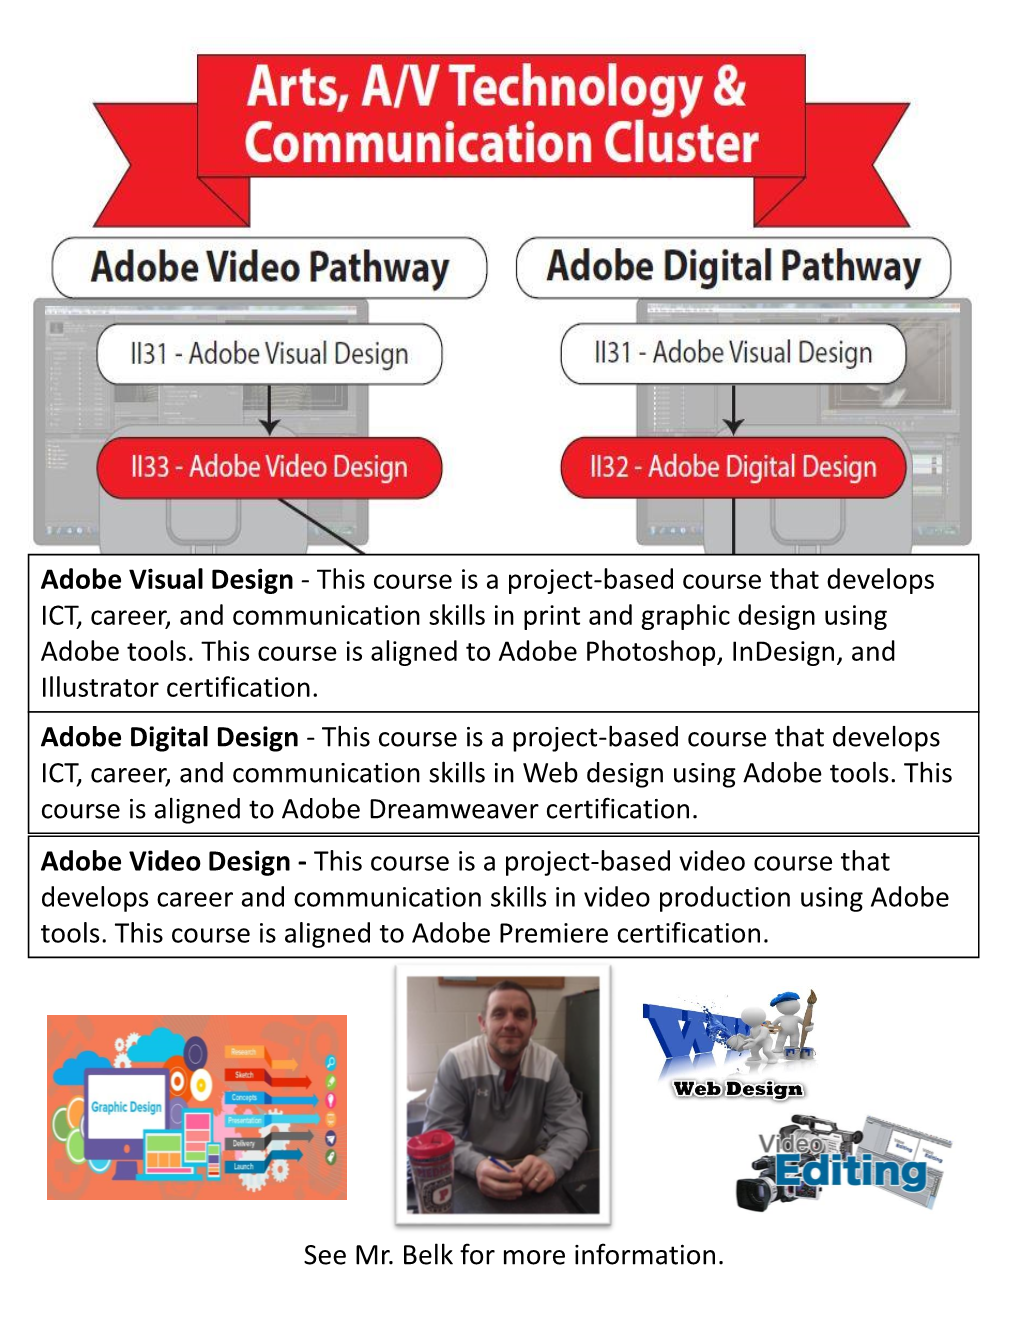 Adobe Visual Design - This Course Is a Project-Based Course That Develops ICT, Career, and Communication Skills in Print and Graphic Design Using Adobe Tools